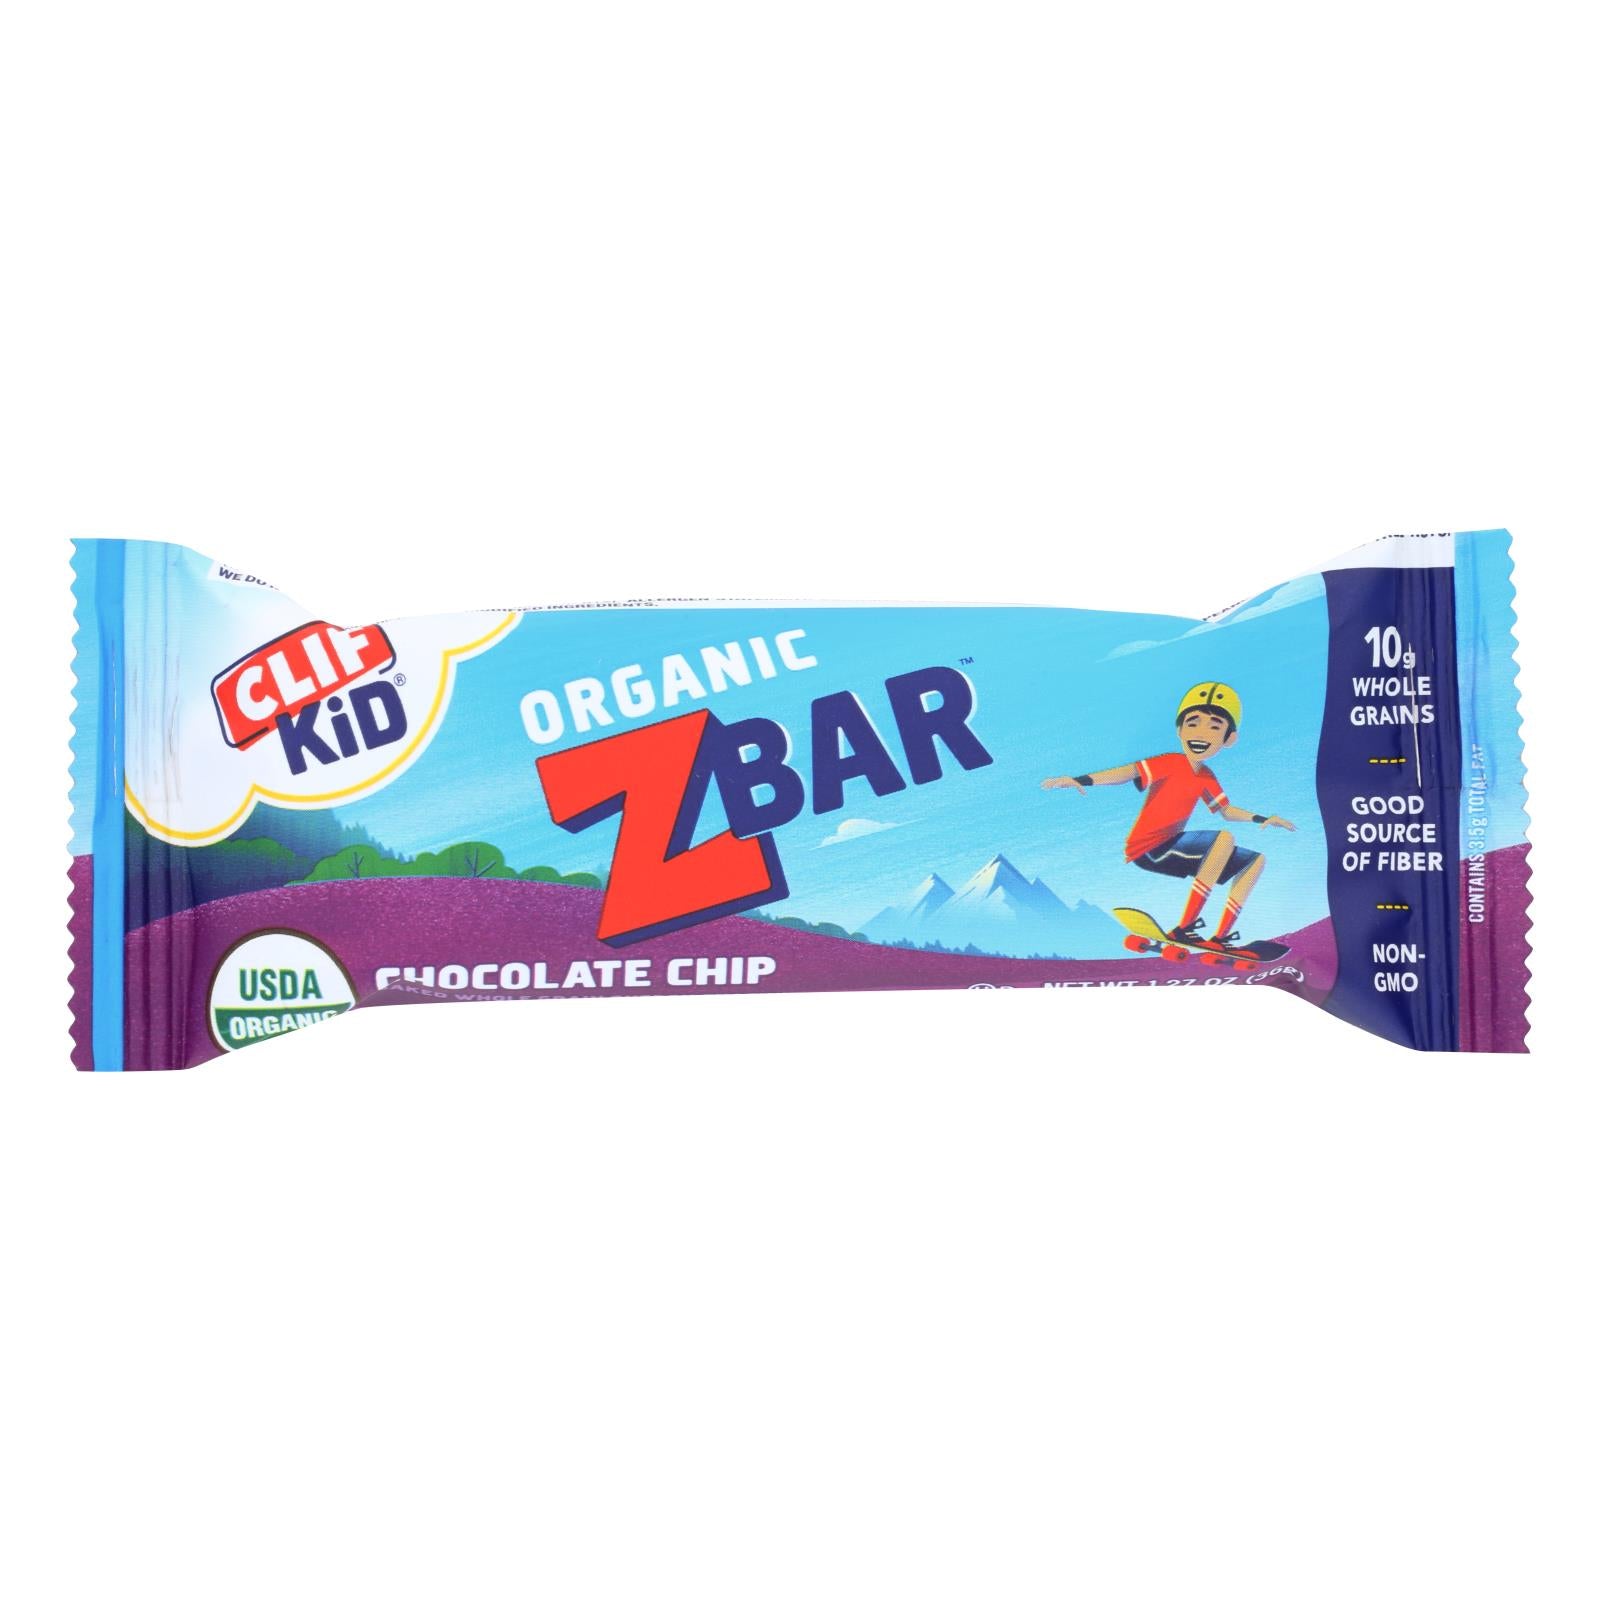 Clif Bar Zbar - Organic Chocolate Chip - Case Of 18 - 1.27 Oz - Whole Green Foods